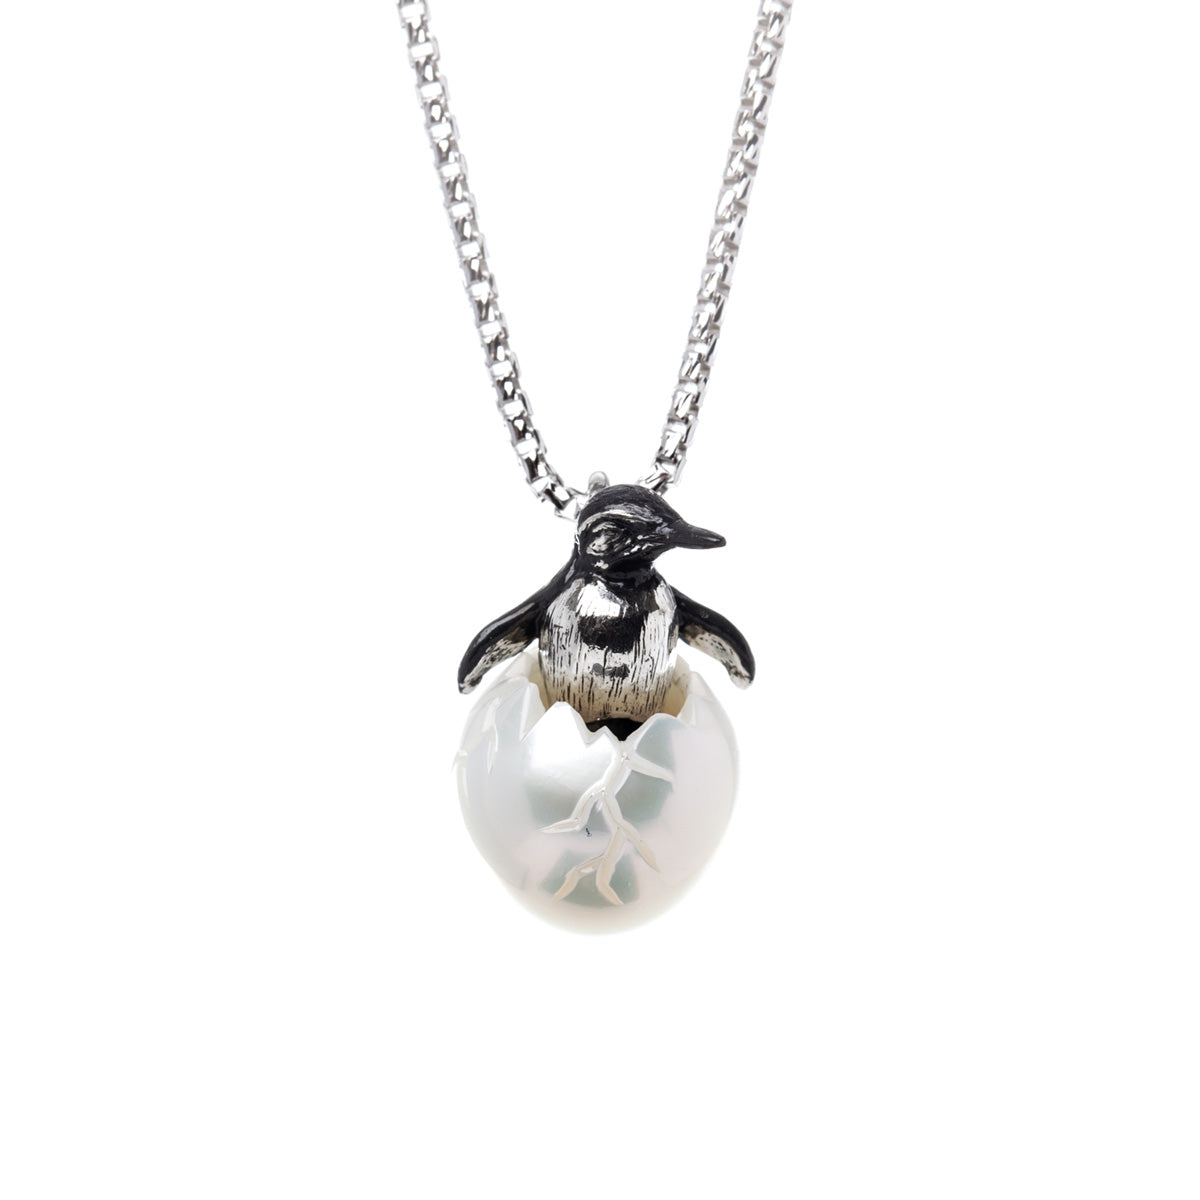 Galatea Penguin Carved White Pearl Egg Necklace